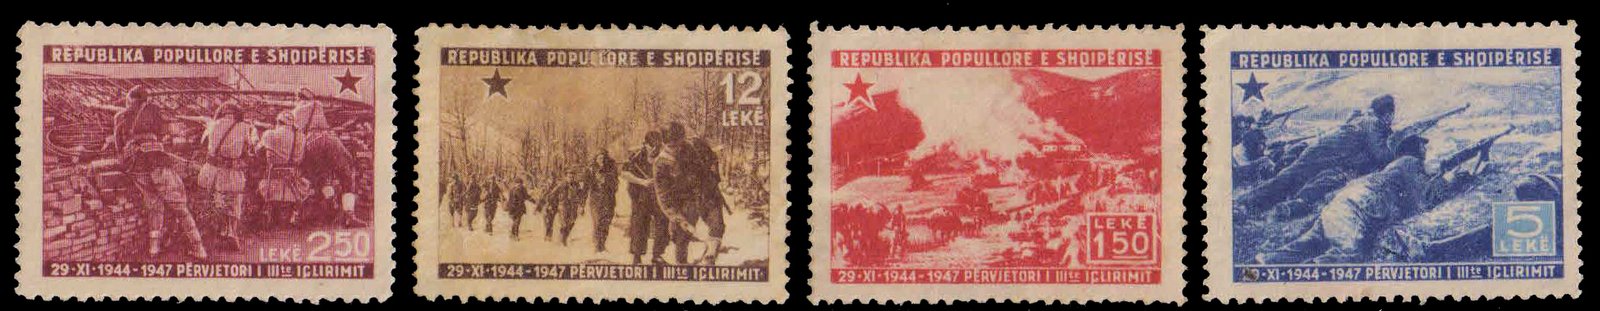 ALBANIA 1947, Liberation, Weapons, Army, Set of 4, Mint G/W, S.G. 487-91-Cat � 49-